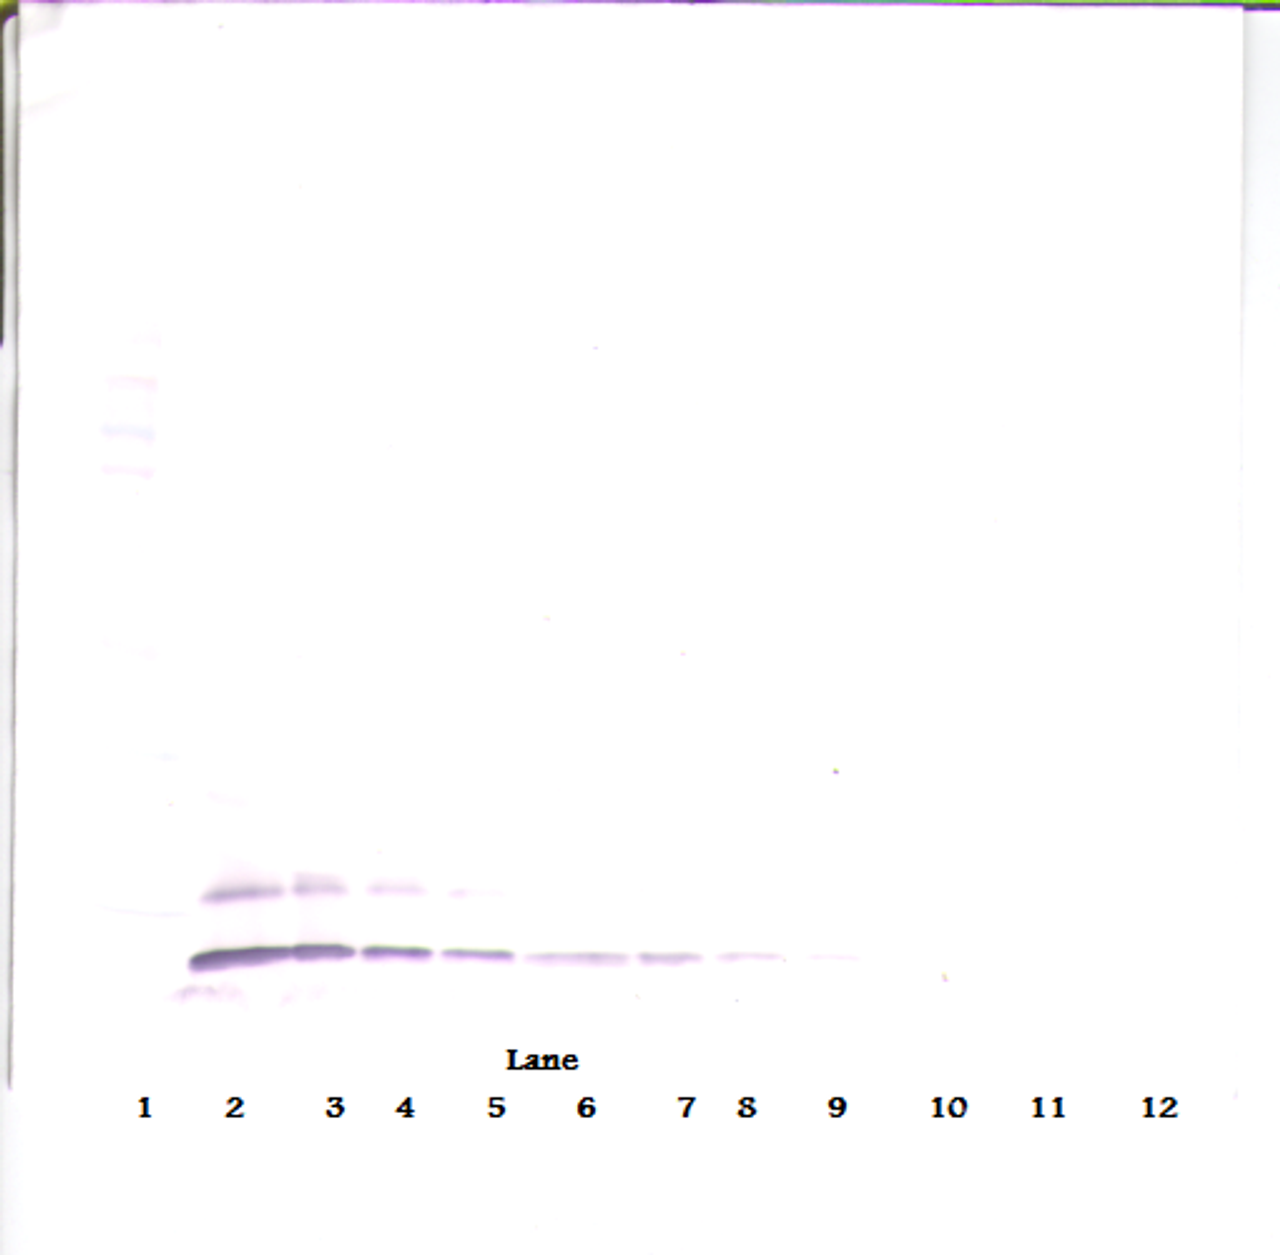 To detect hTARC by Western Blot analysis this antibody can be used at a concentration of 0.1 - 0.2 ug/ml. Used in conjunction with compatible secondary reagents the detection limit for recombinant hTARC is 1.5 - 3.0 ng/lane, under either reducing or non-reducing conditions.